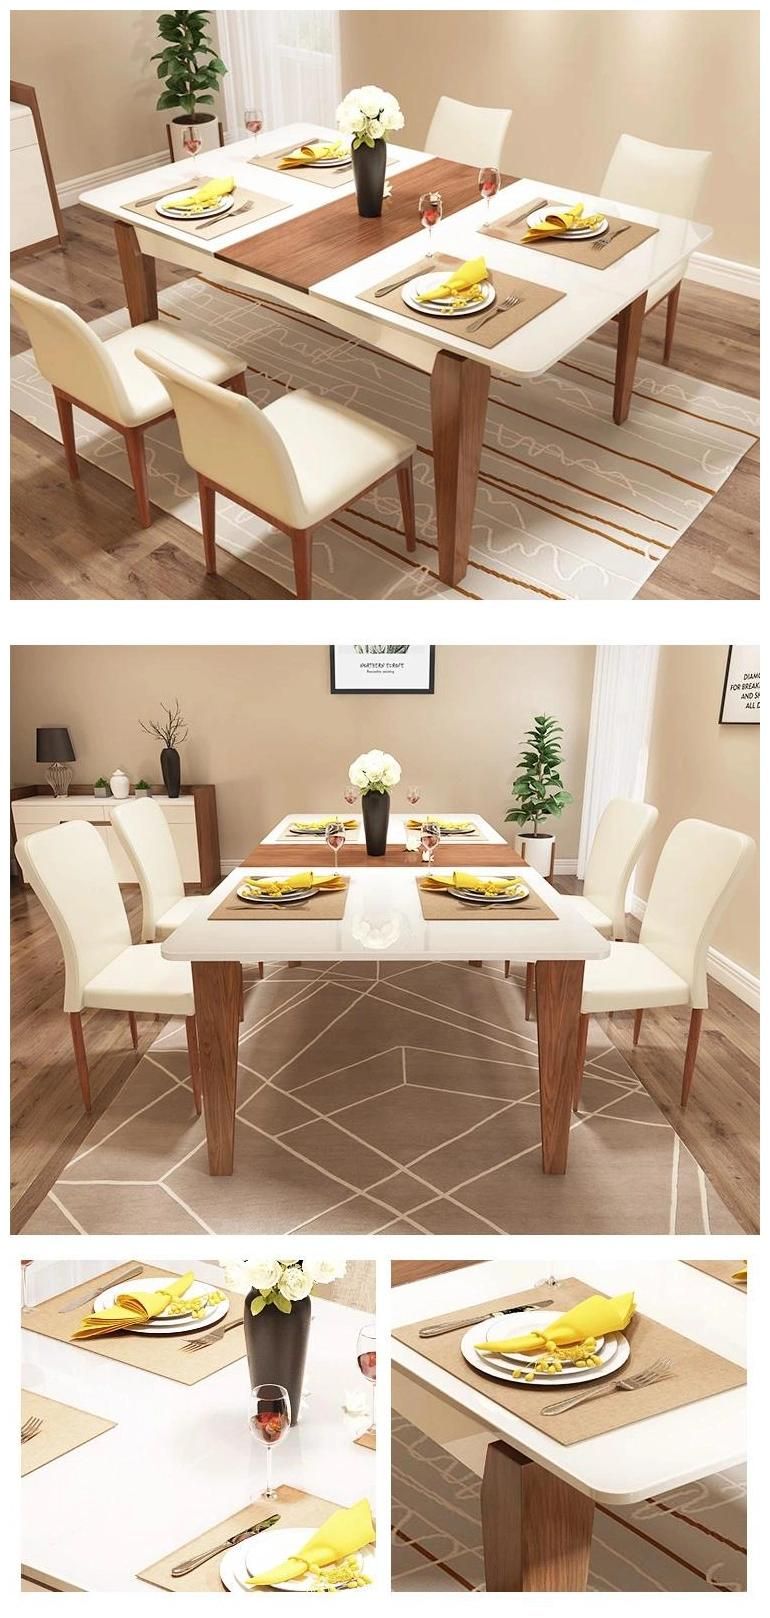 High Quality Hot Sell Luxury Designs Wood Home Table Dining Room Furniture Sets